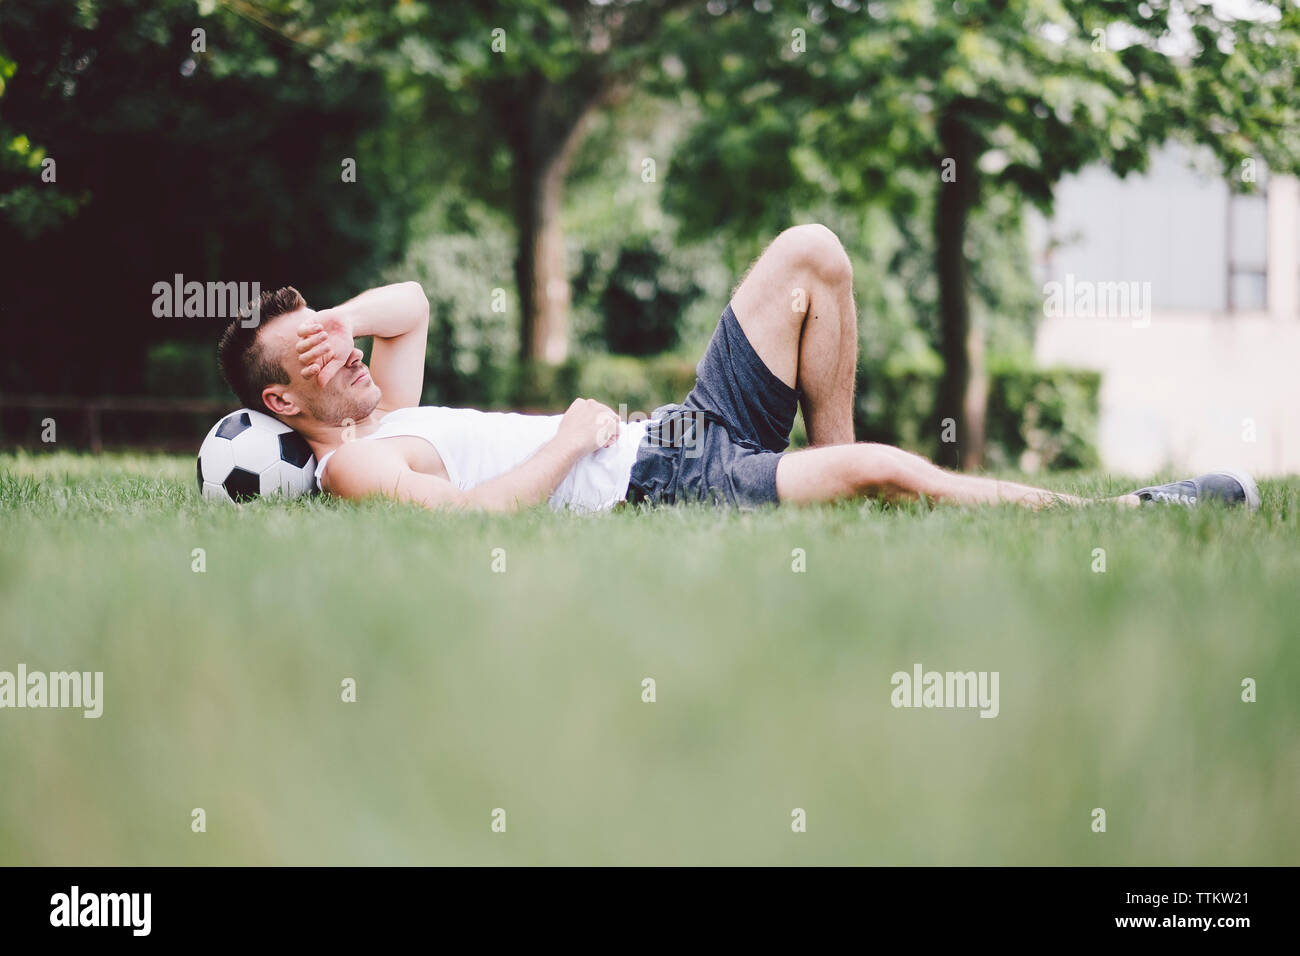 Young man napping on soccer field at park Stock Photo